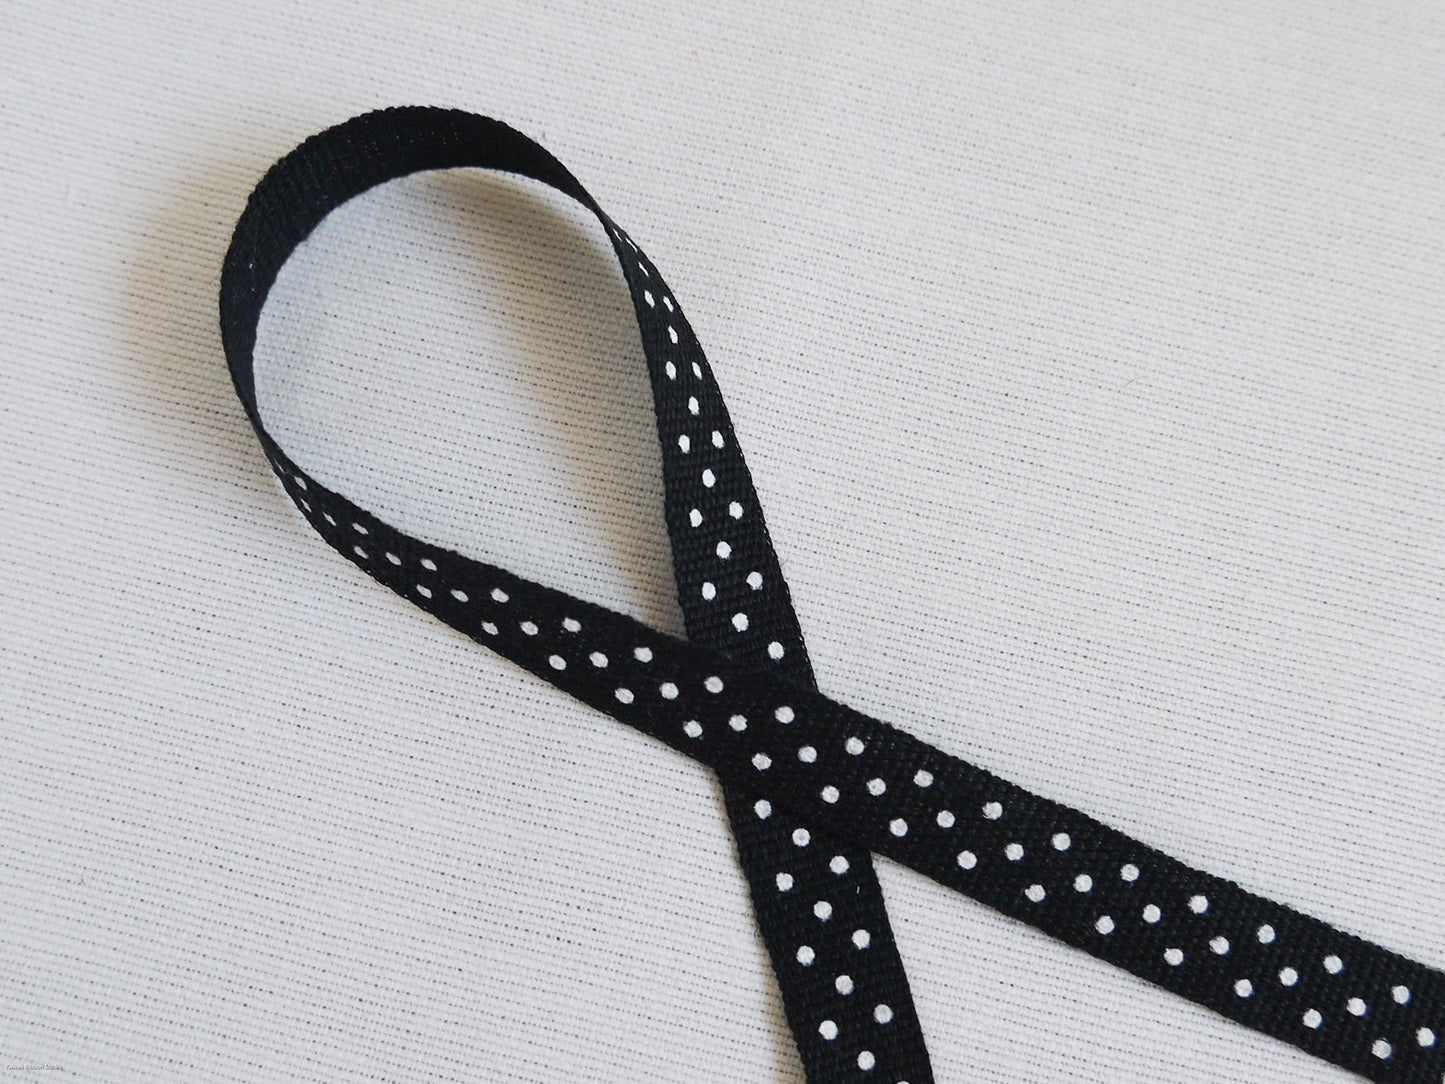 10mm Polka dots ribbon/ tape in 100% washed linen